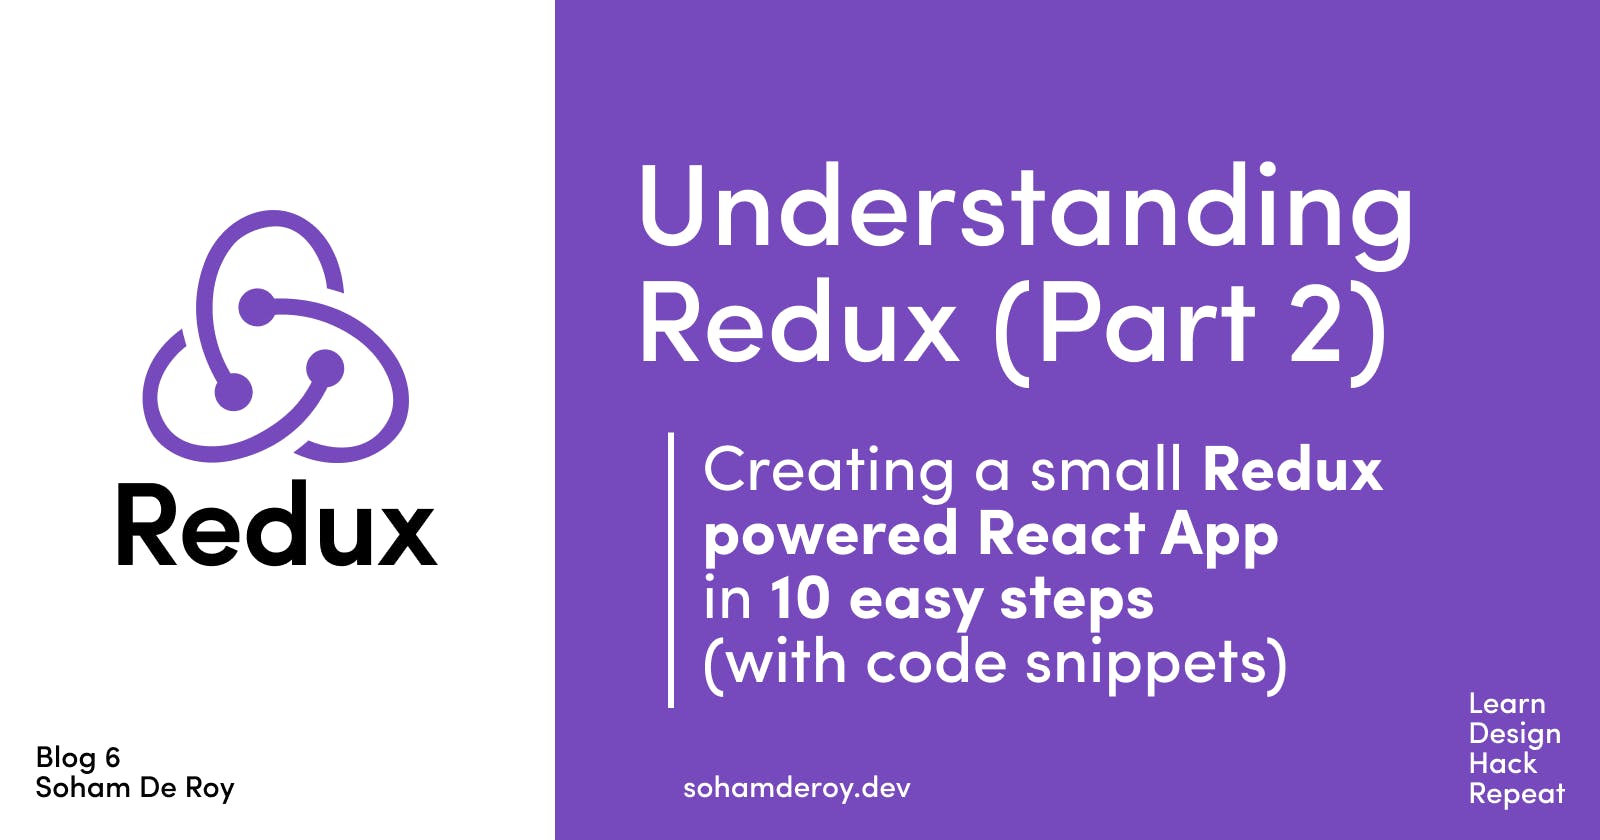 Understanding Redux (Part 2): Creating a small Redux powered React App in 10 easy steps (with code snippets)